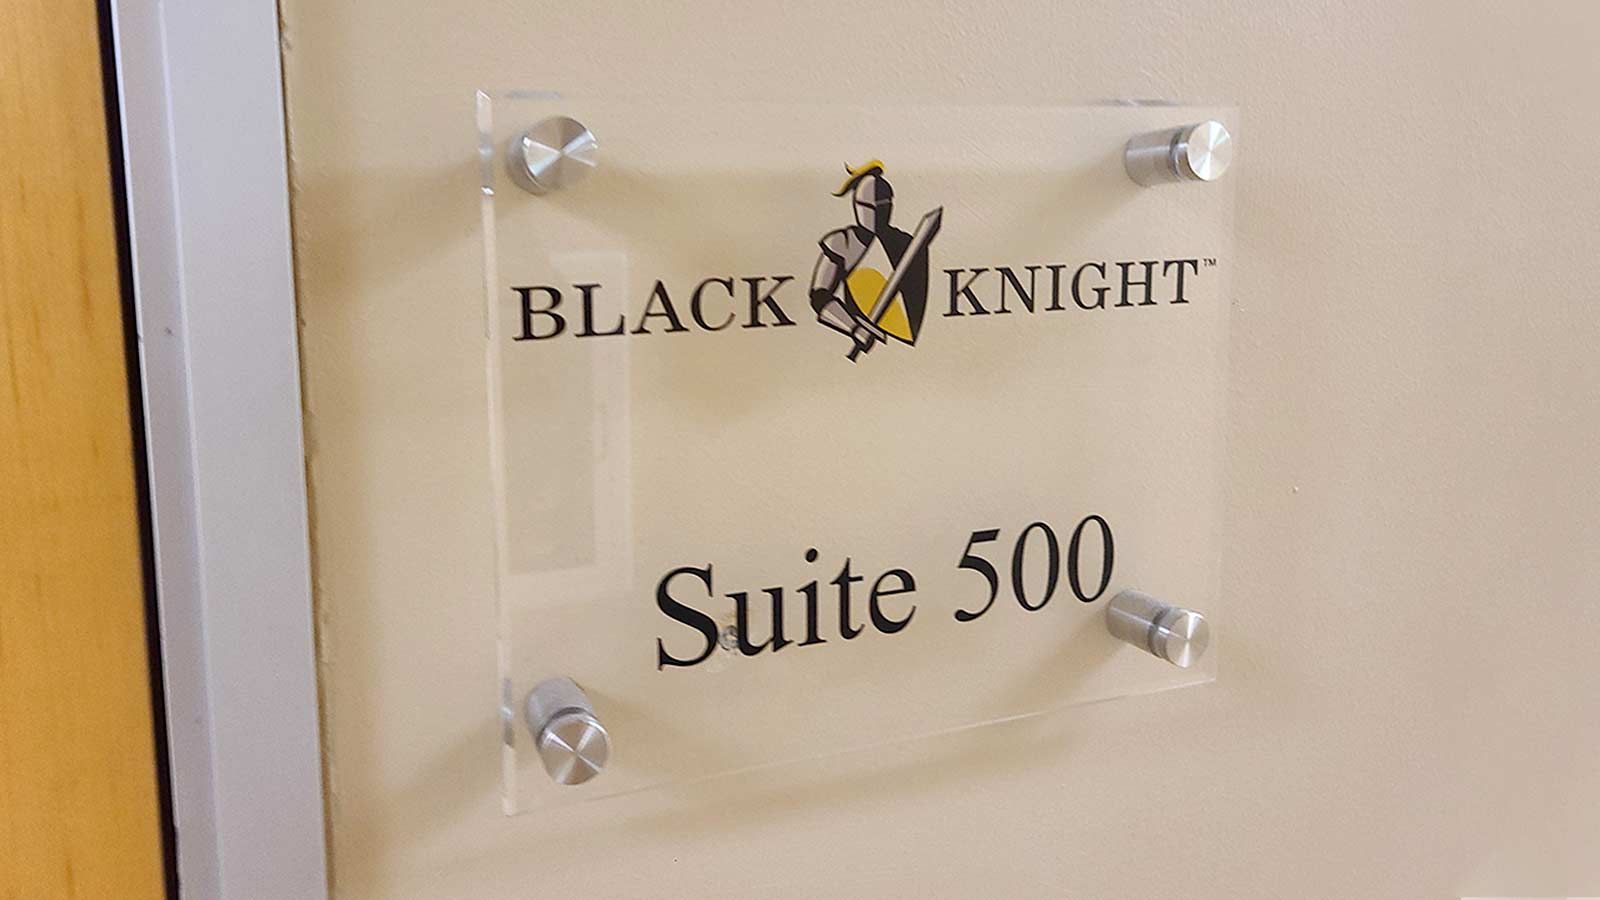 Black Knight office sign placed on the wall